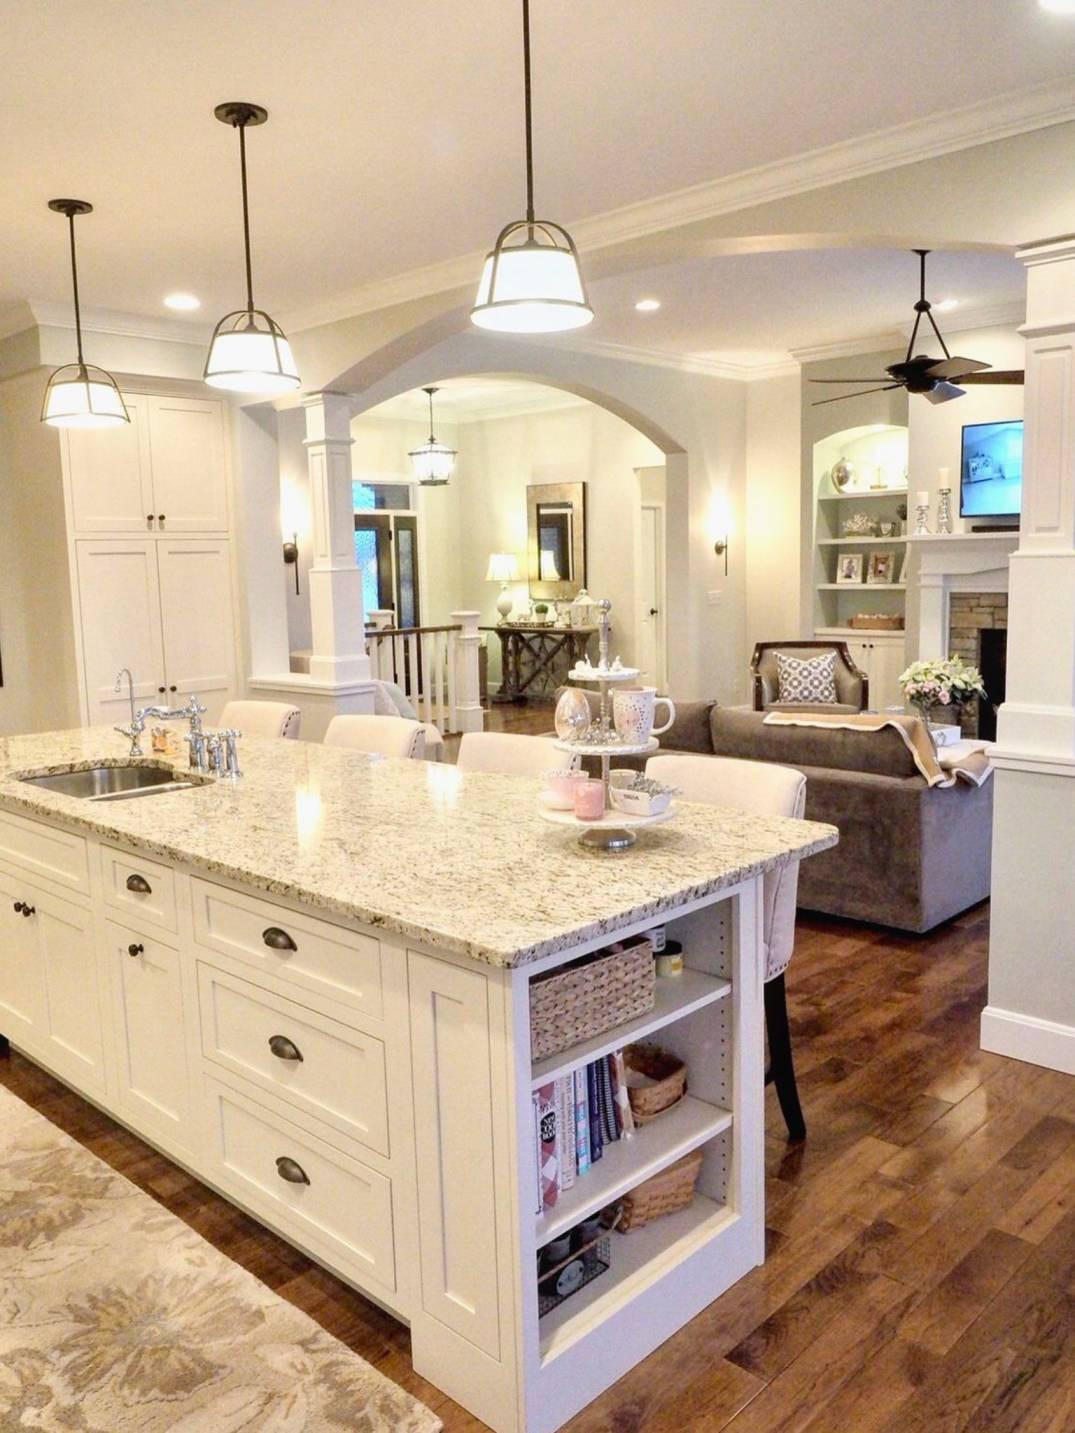 11 Perfect Kitchens with Hardwood Floors and White Cabinets 2024 free download kitchens with hardwood floors and white cabinets of 20 elegant flooring ideas for kitchens with white cabinets www regarding white kitchen with grey floor inspirational white glazed kitchen 